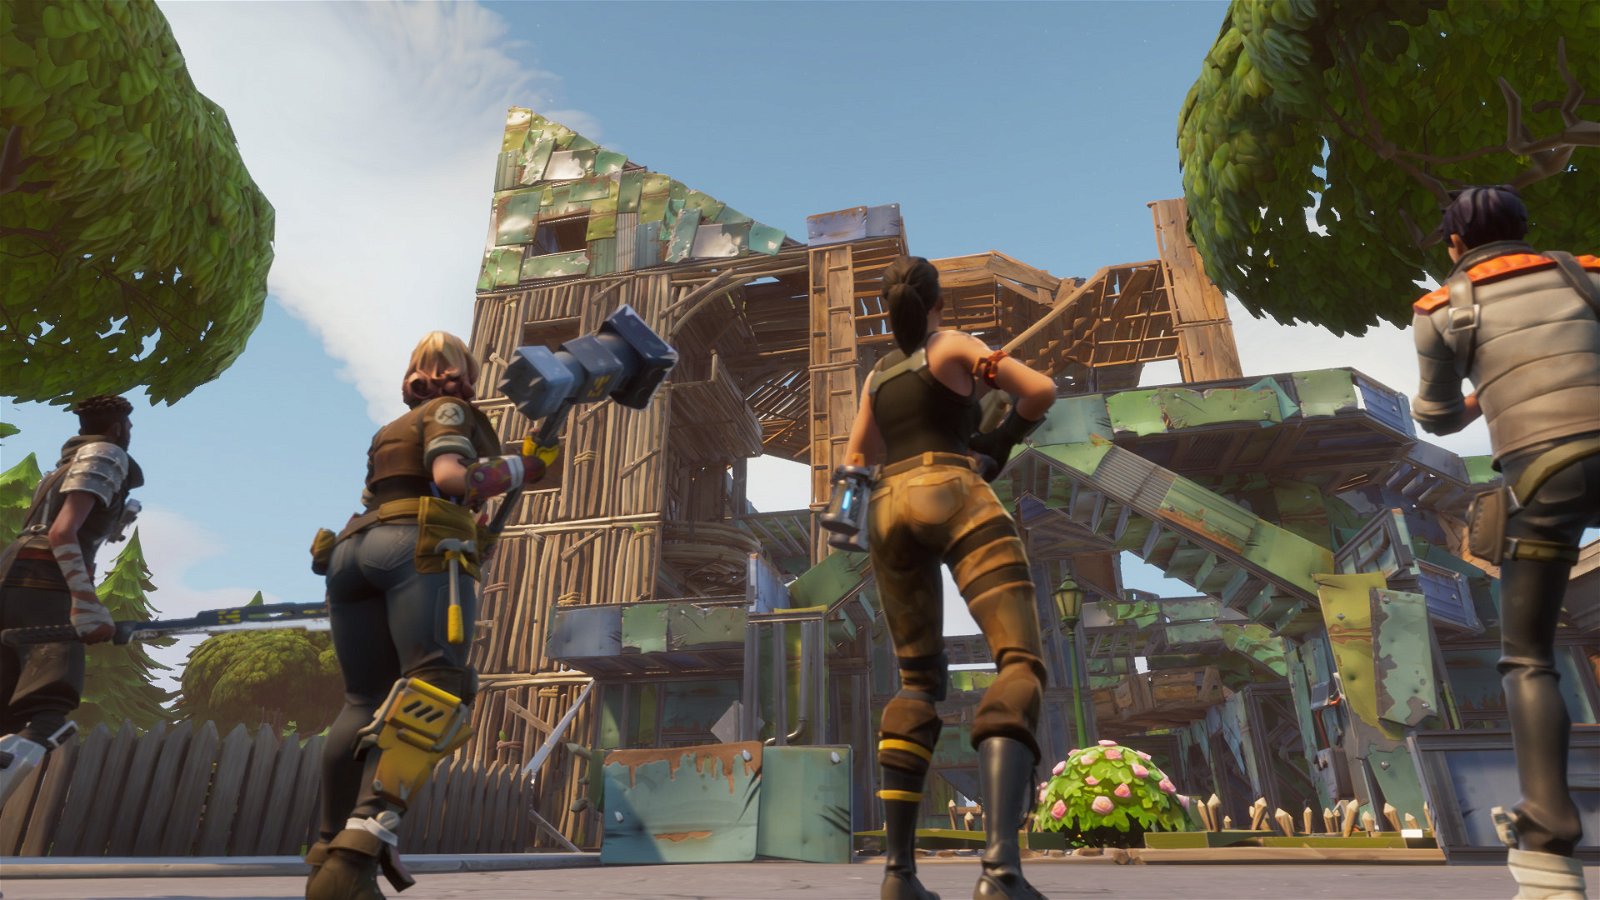 Defend your forts in Fortnite this July